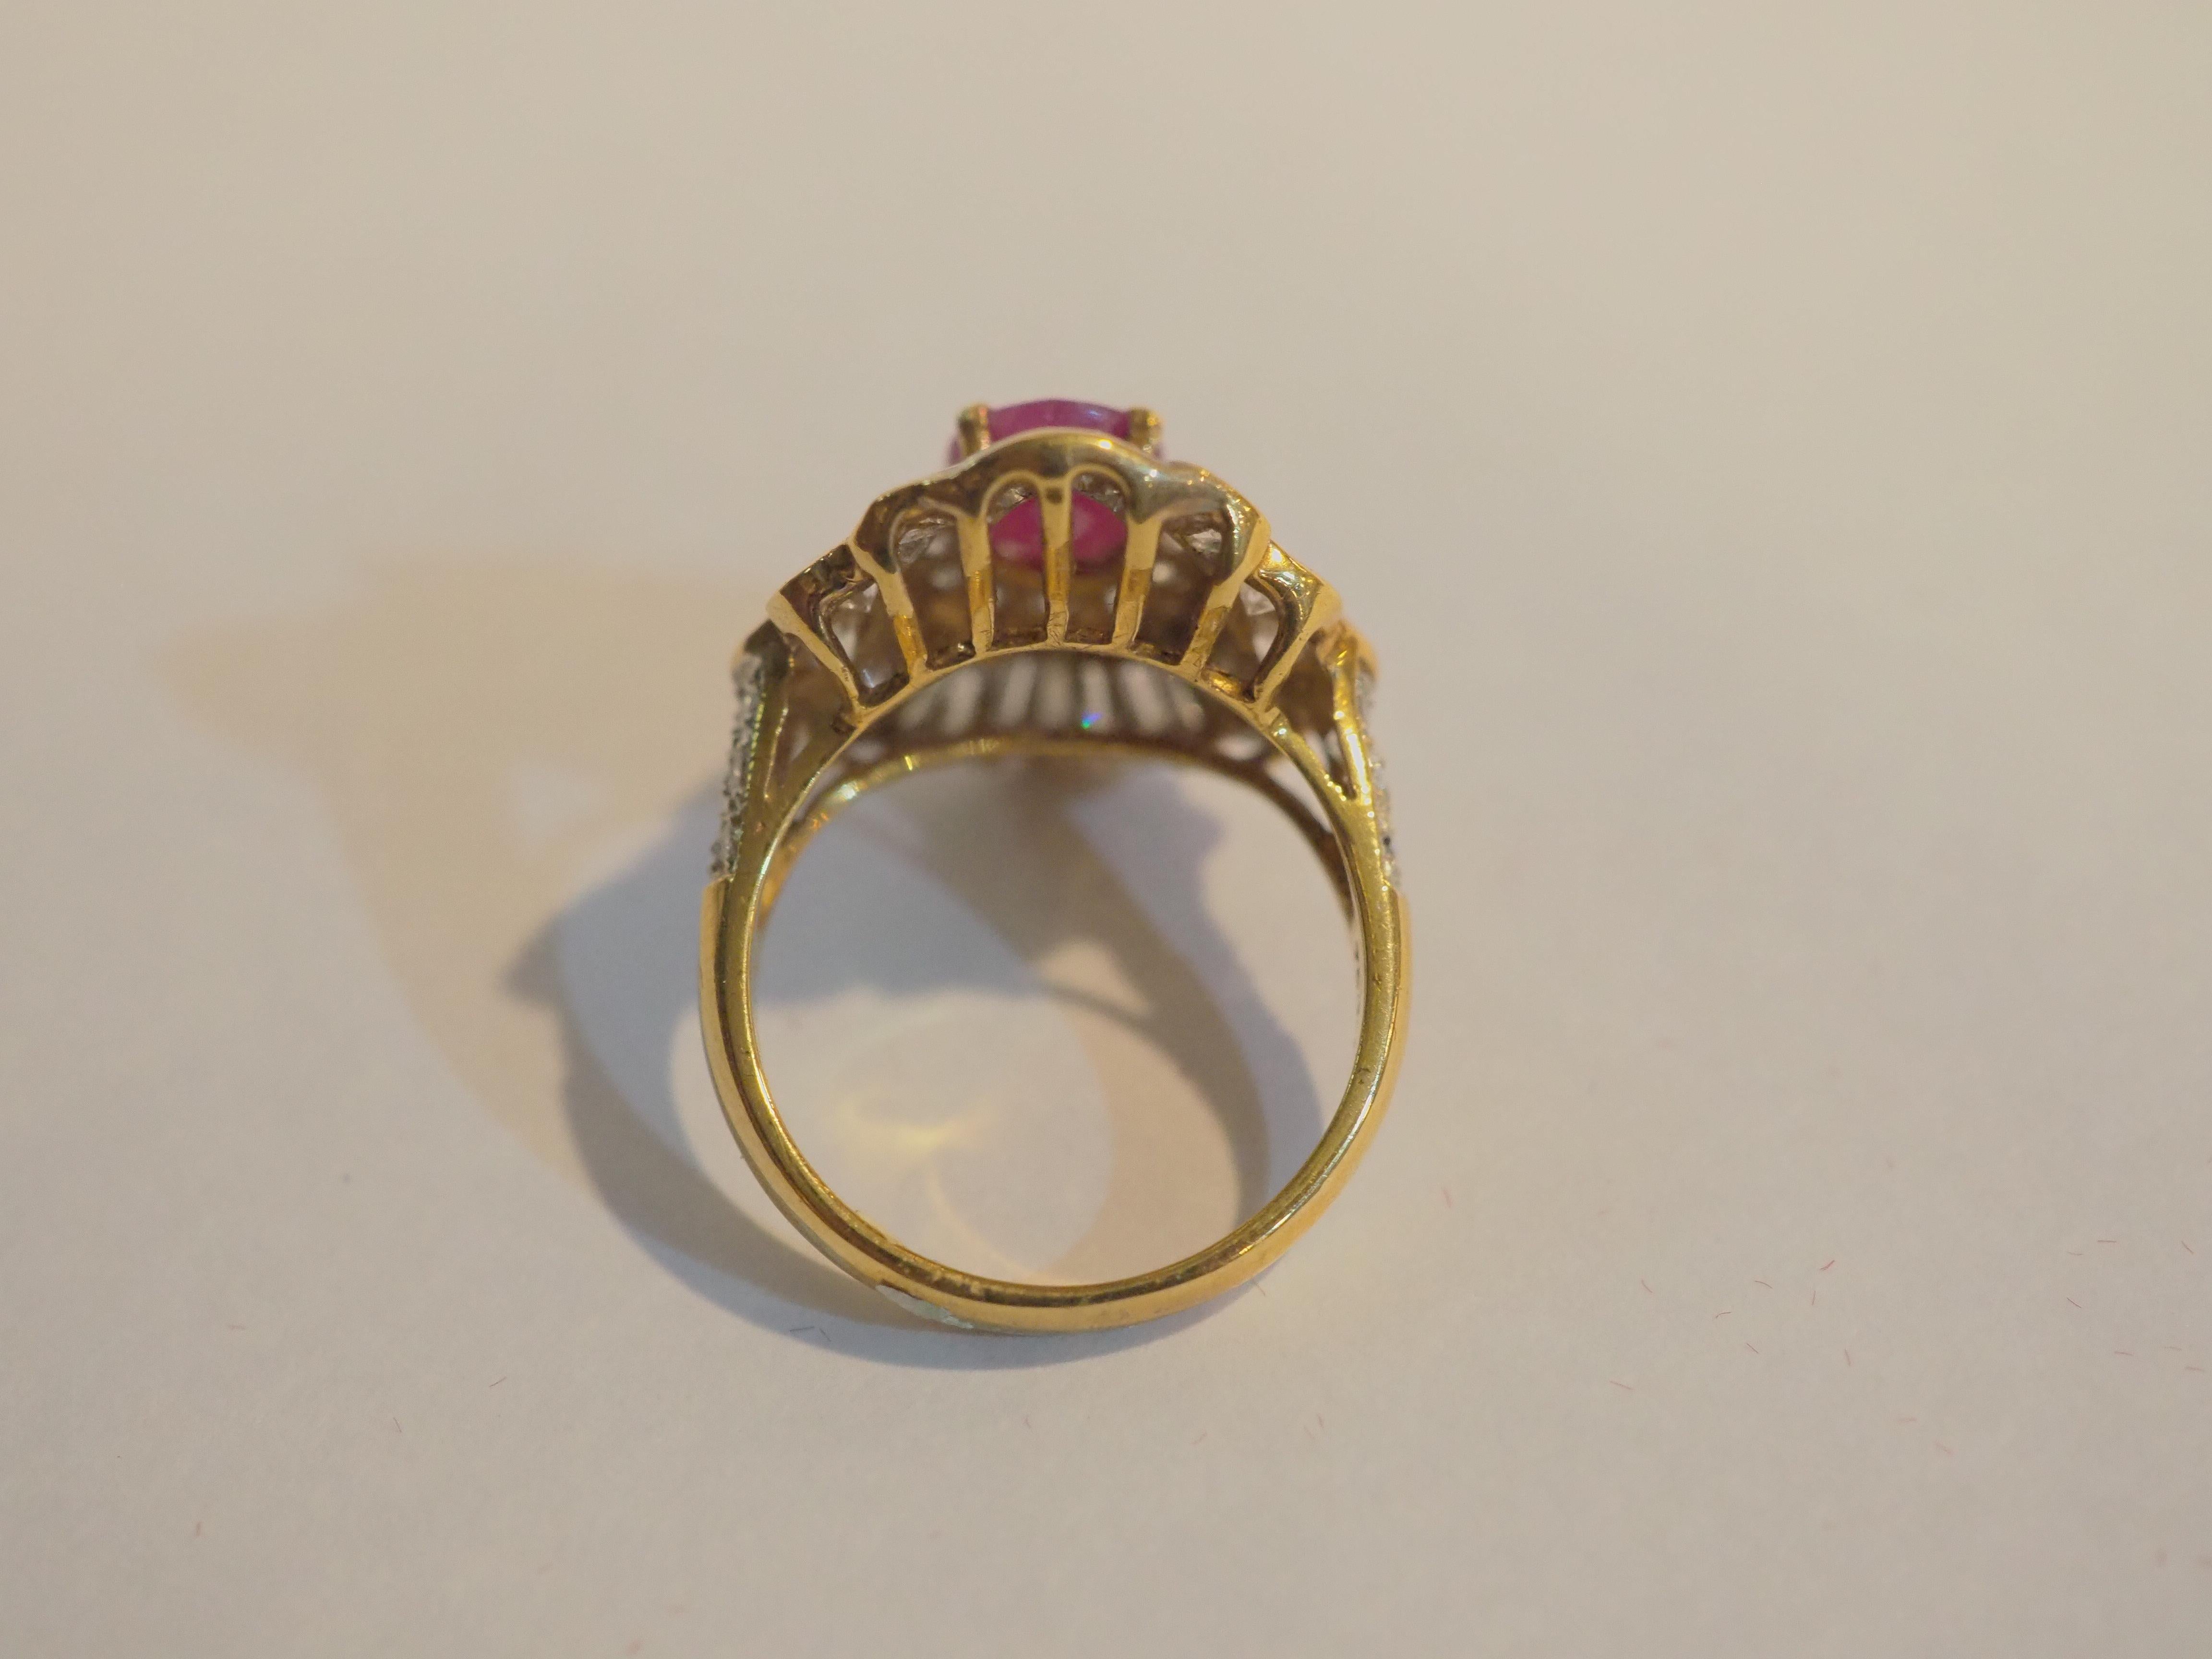 18k Gold 1.06 Carat Oval Burma Ruby & 1.41 Carat Diamond Cocktail Ring In Excellent Condition For Sale In เกาะสมุย, TH